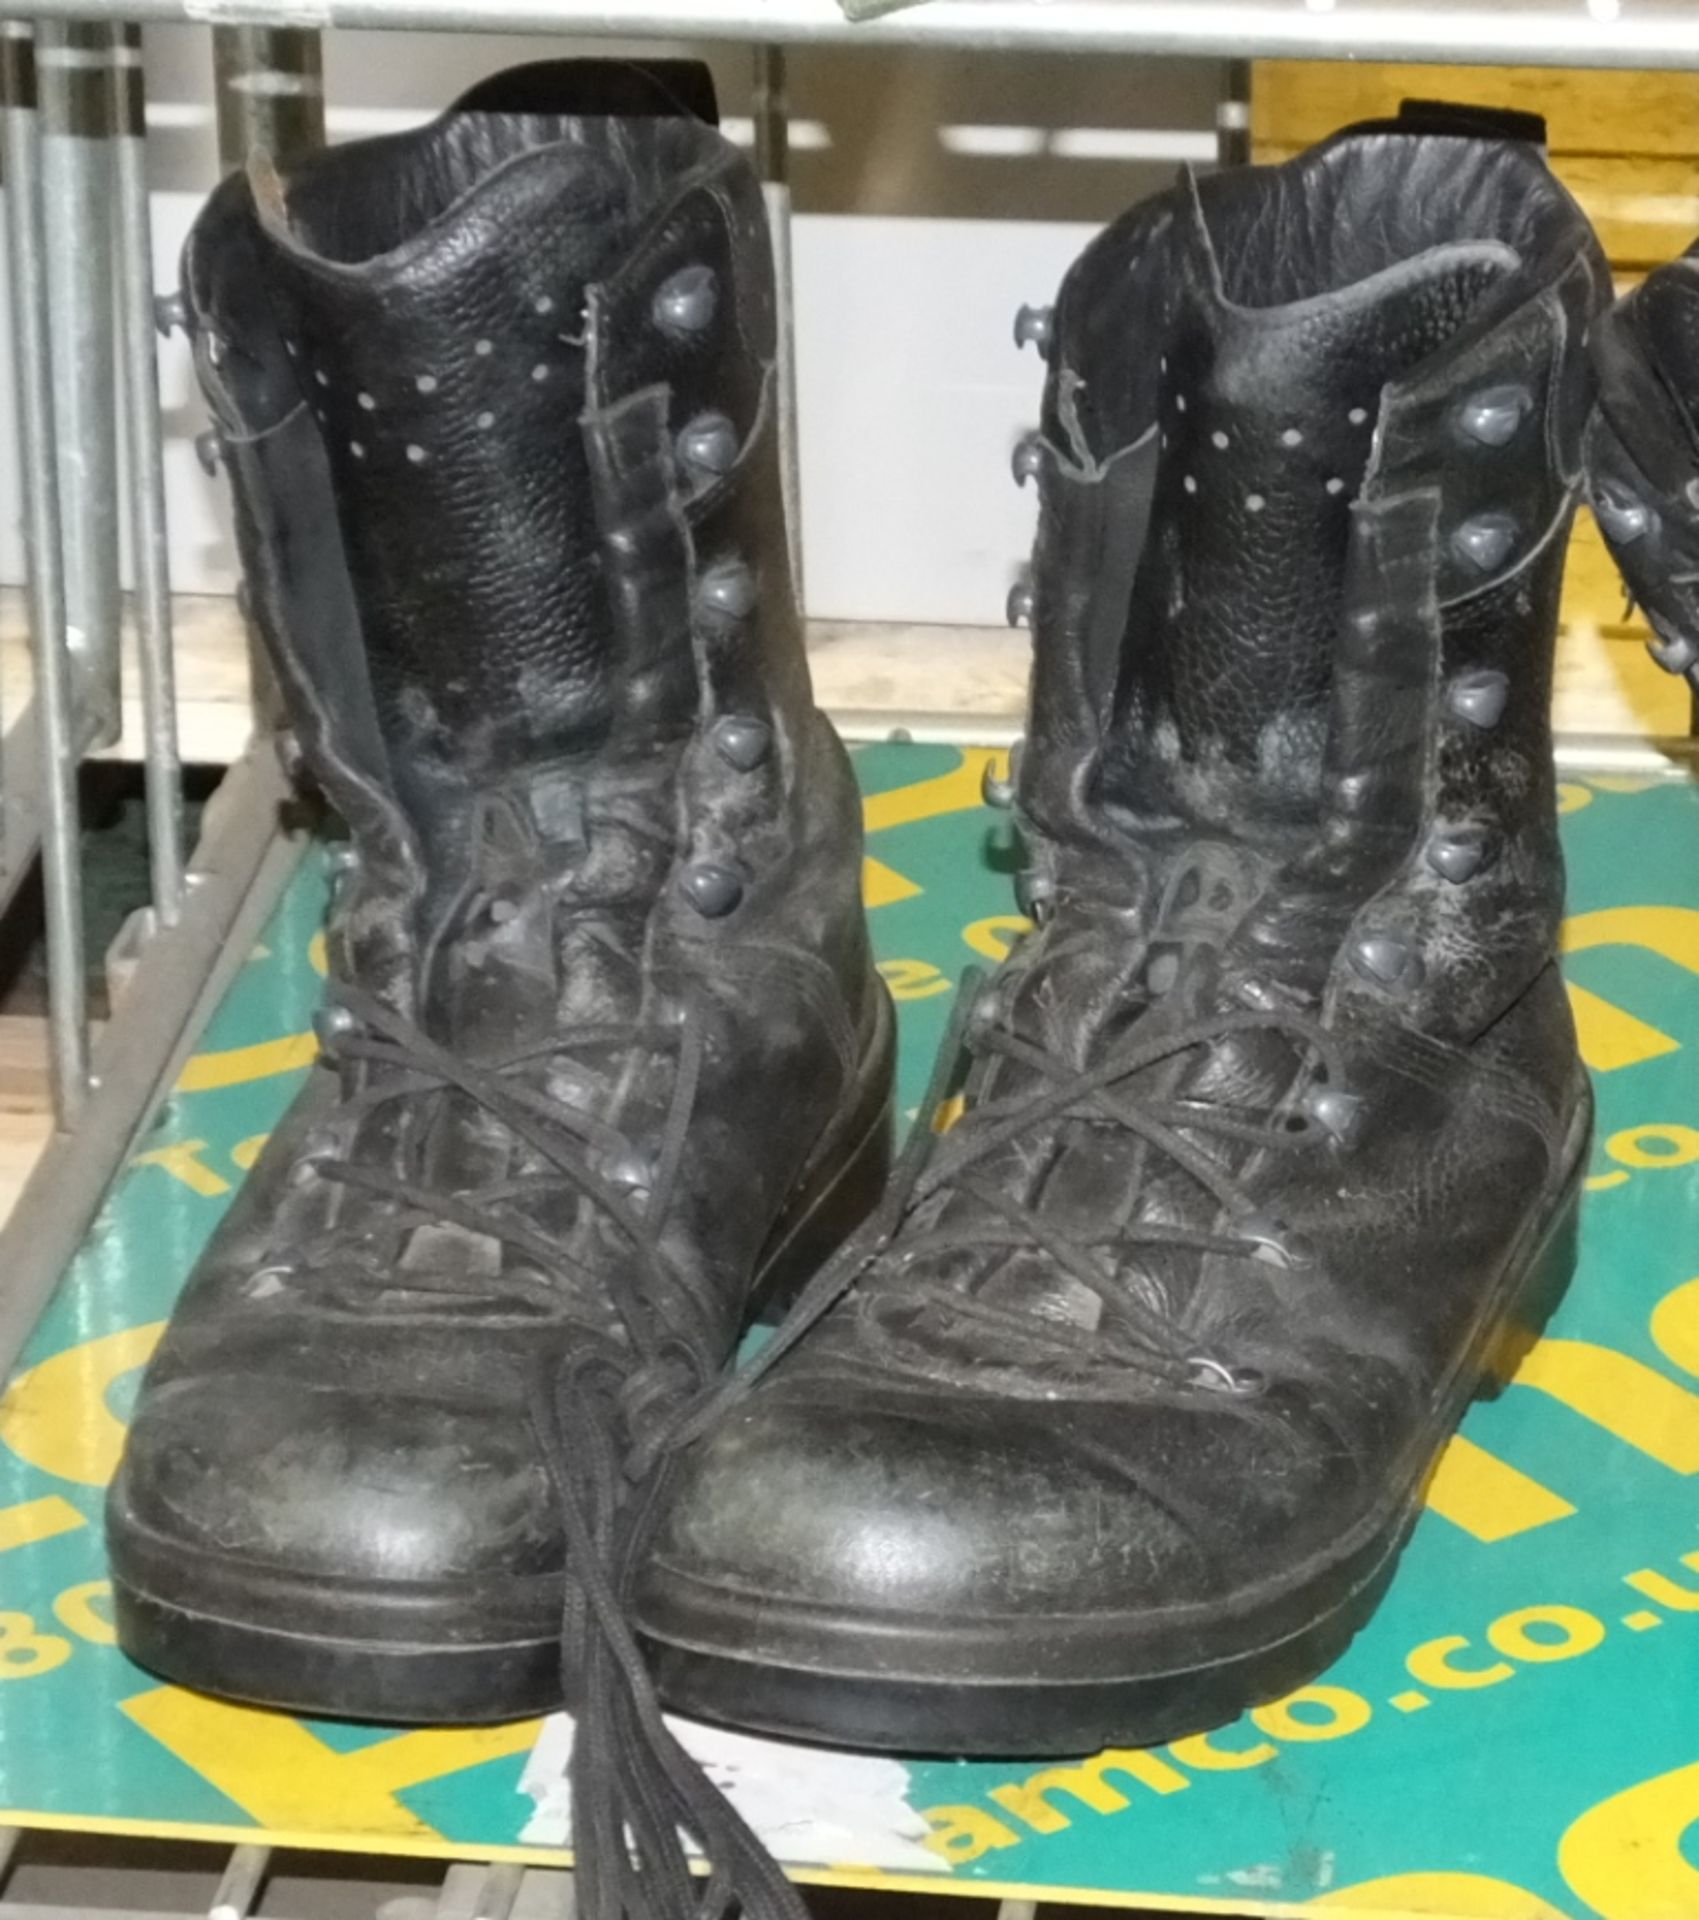 3x Heavy duty boots - German Para - unknown sizes - Image 4 of 4